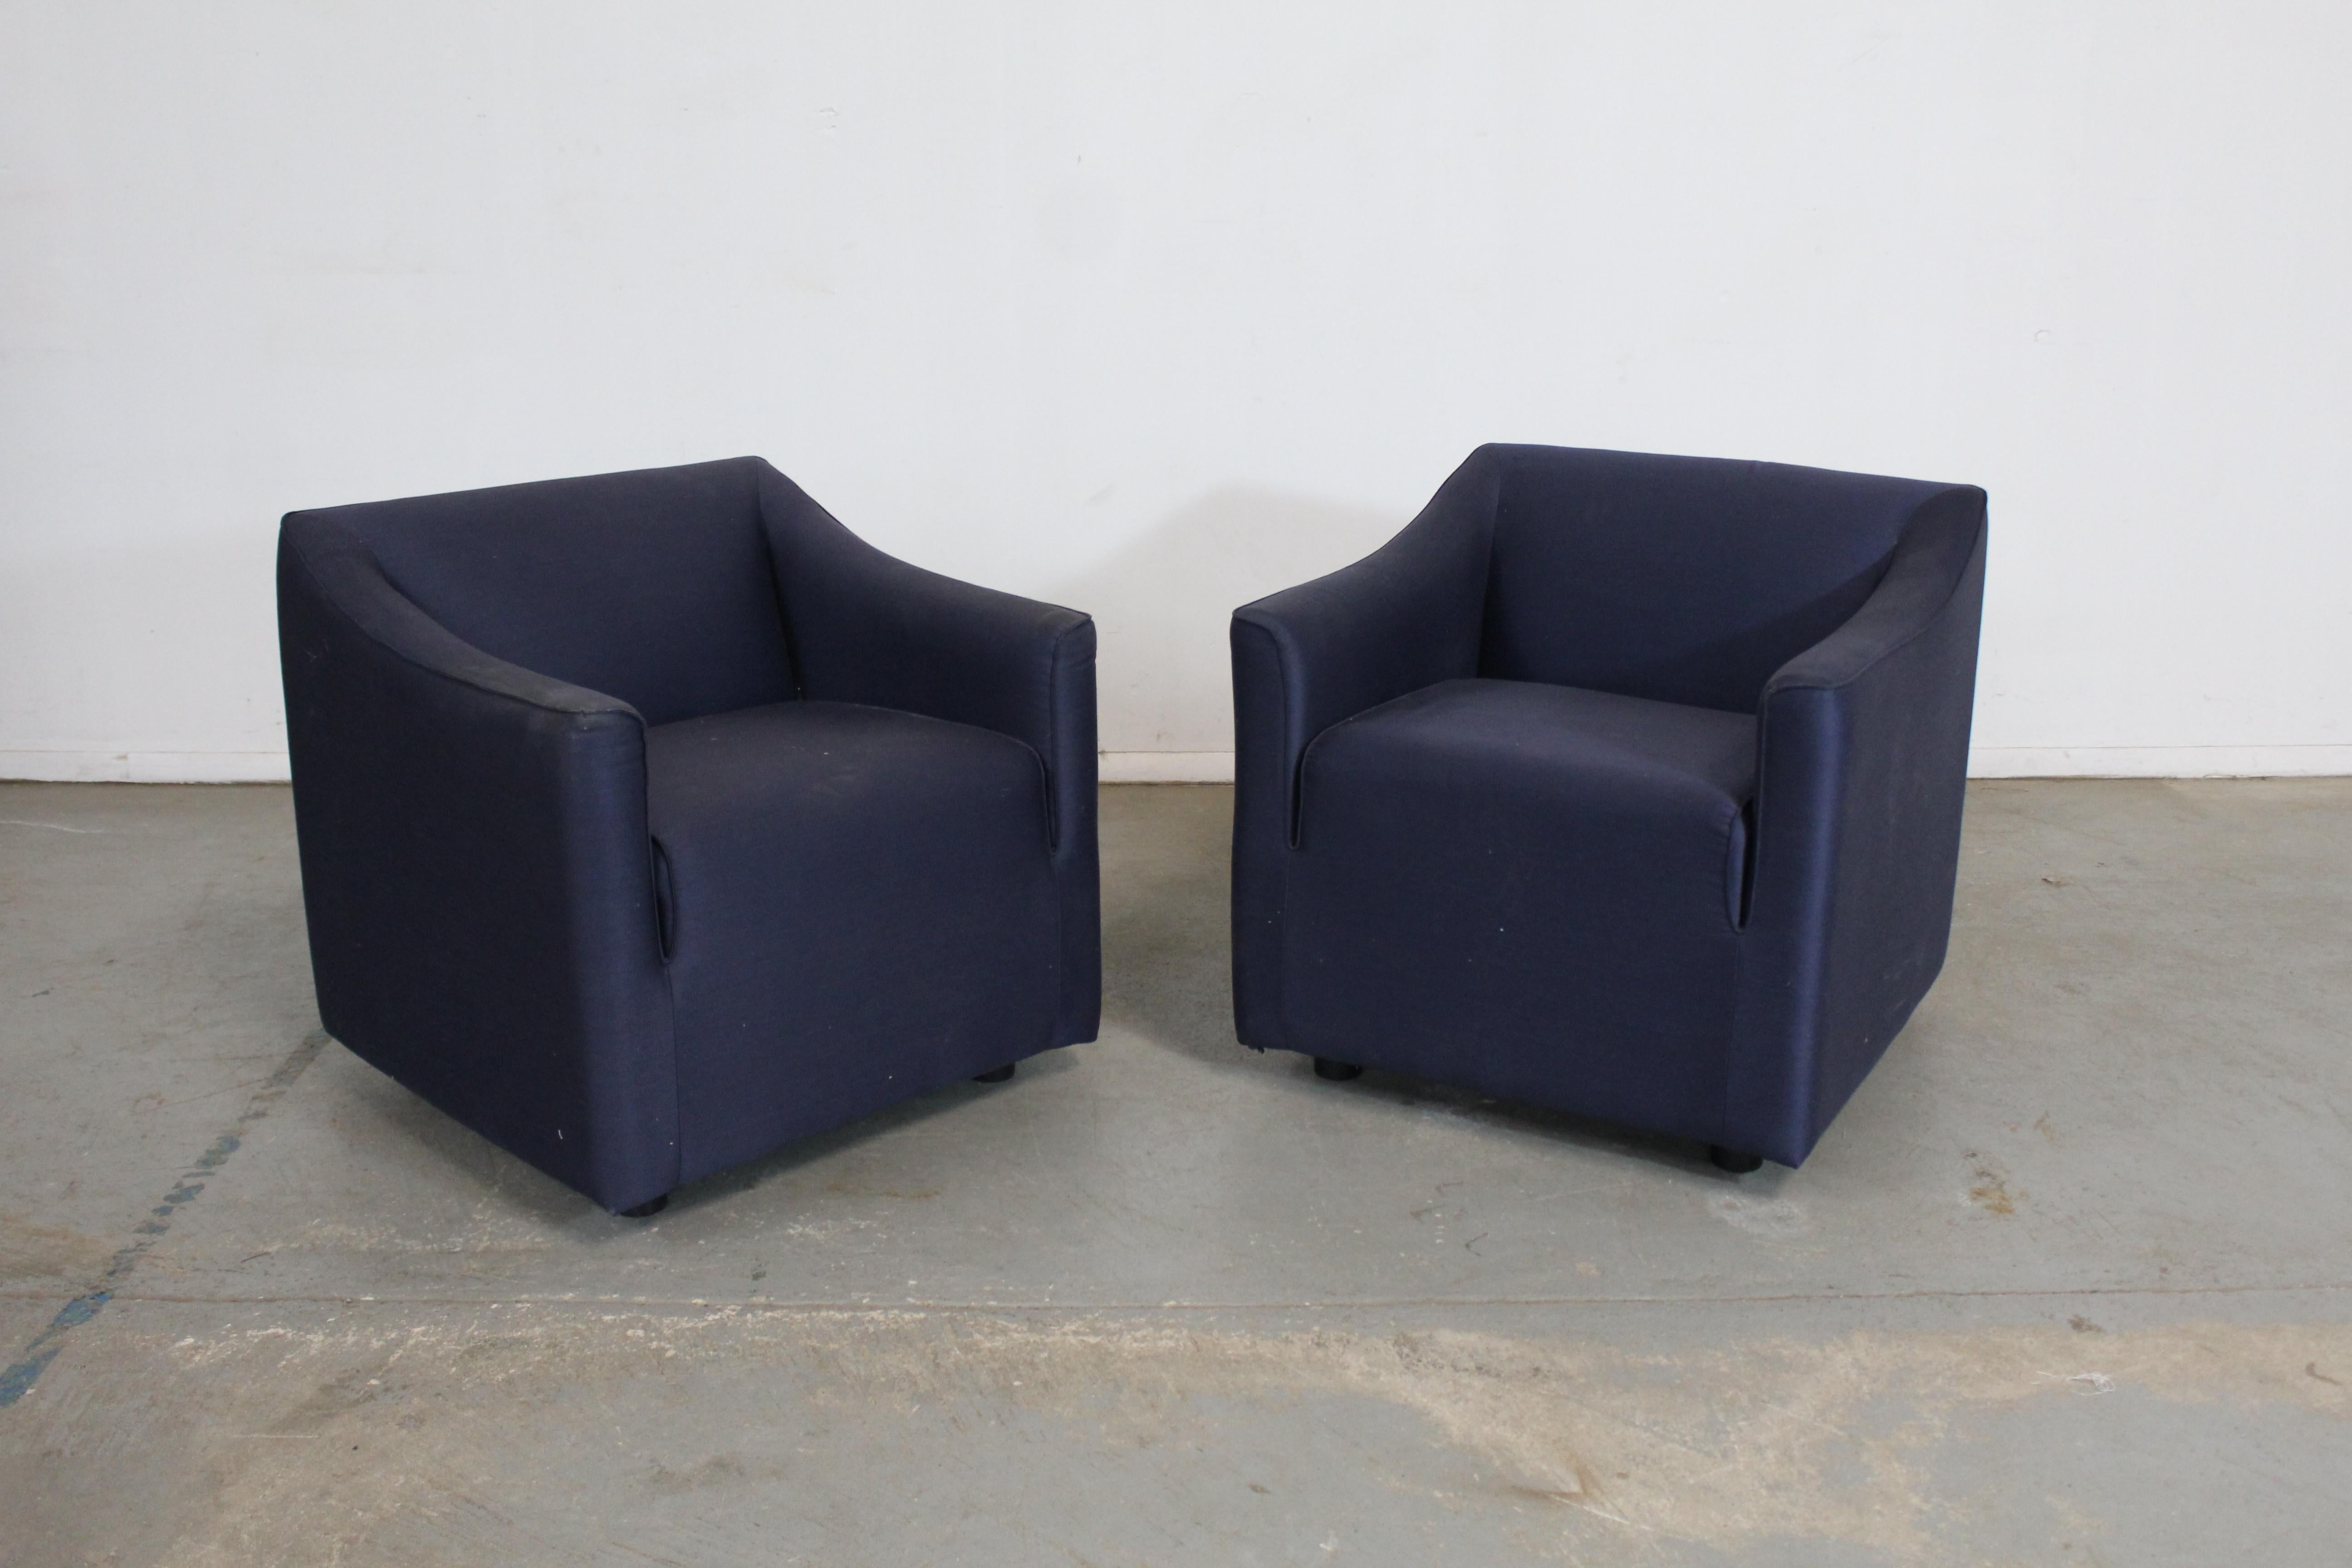 Late 20th Century Pair of Mid-Century Modern Cube Club Chairs